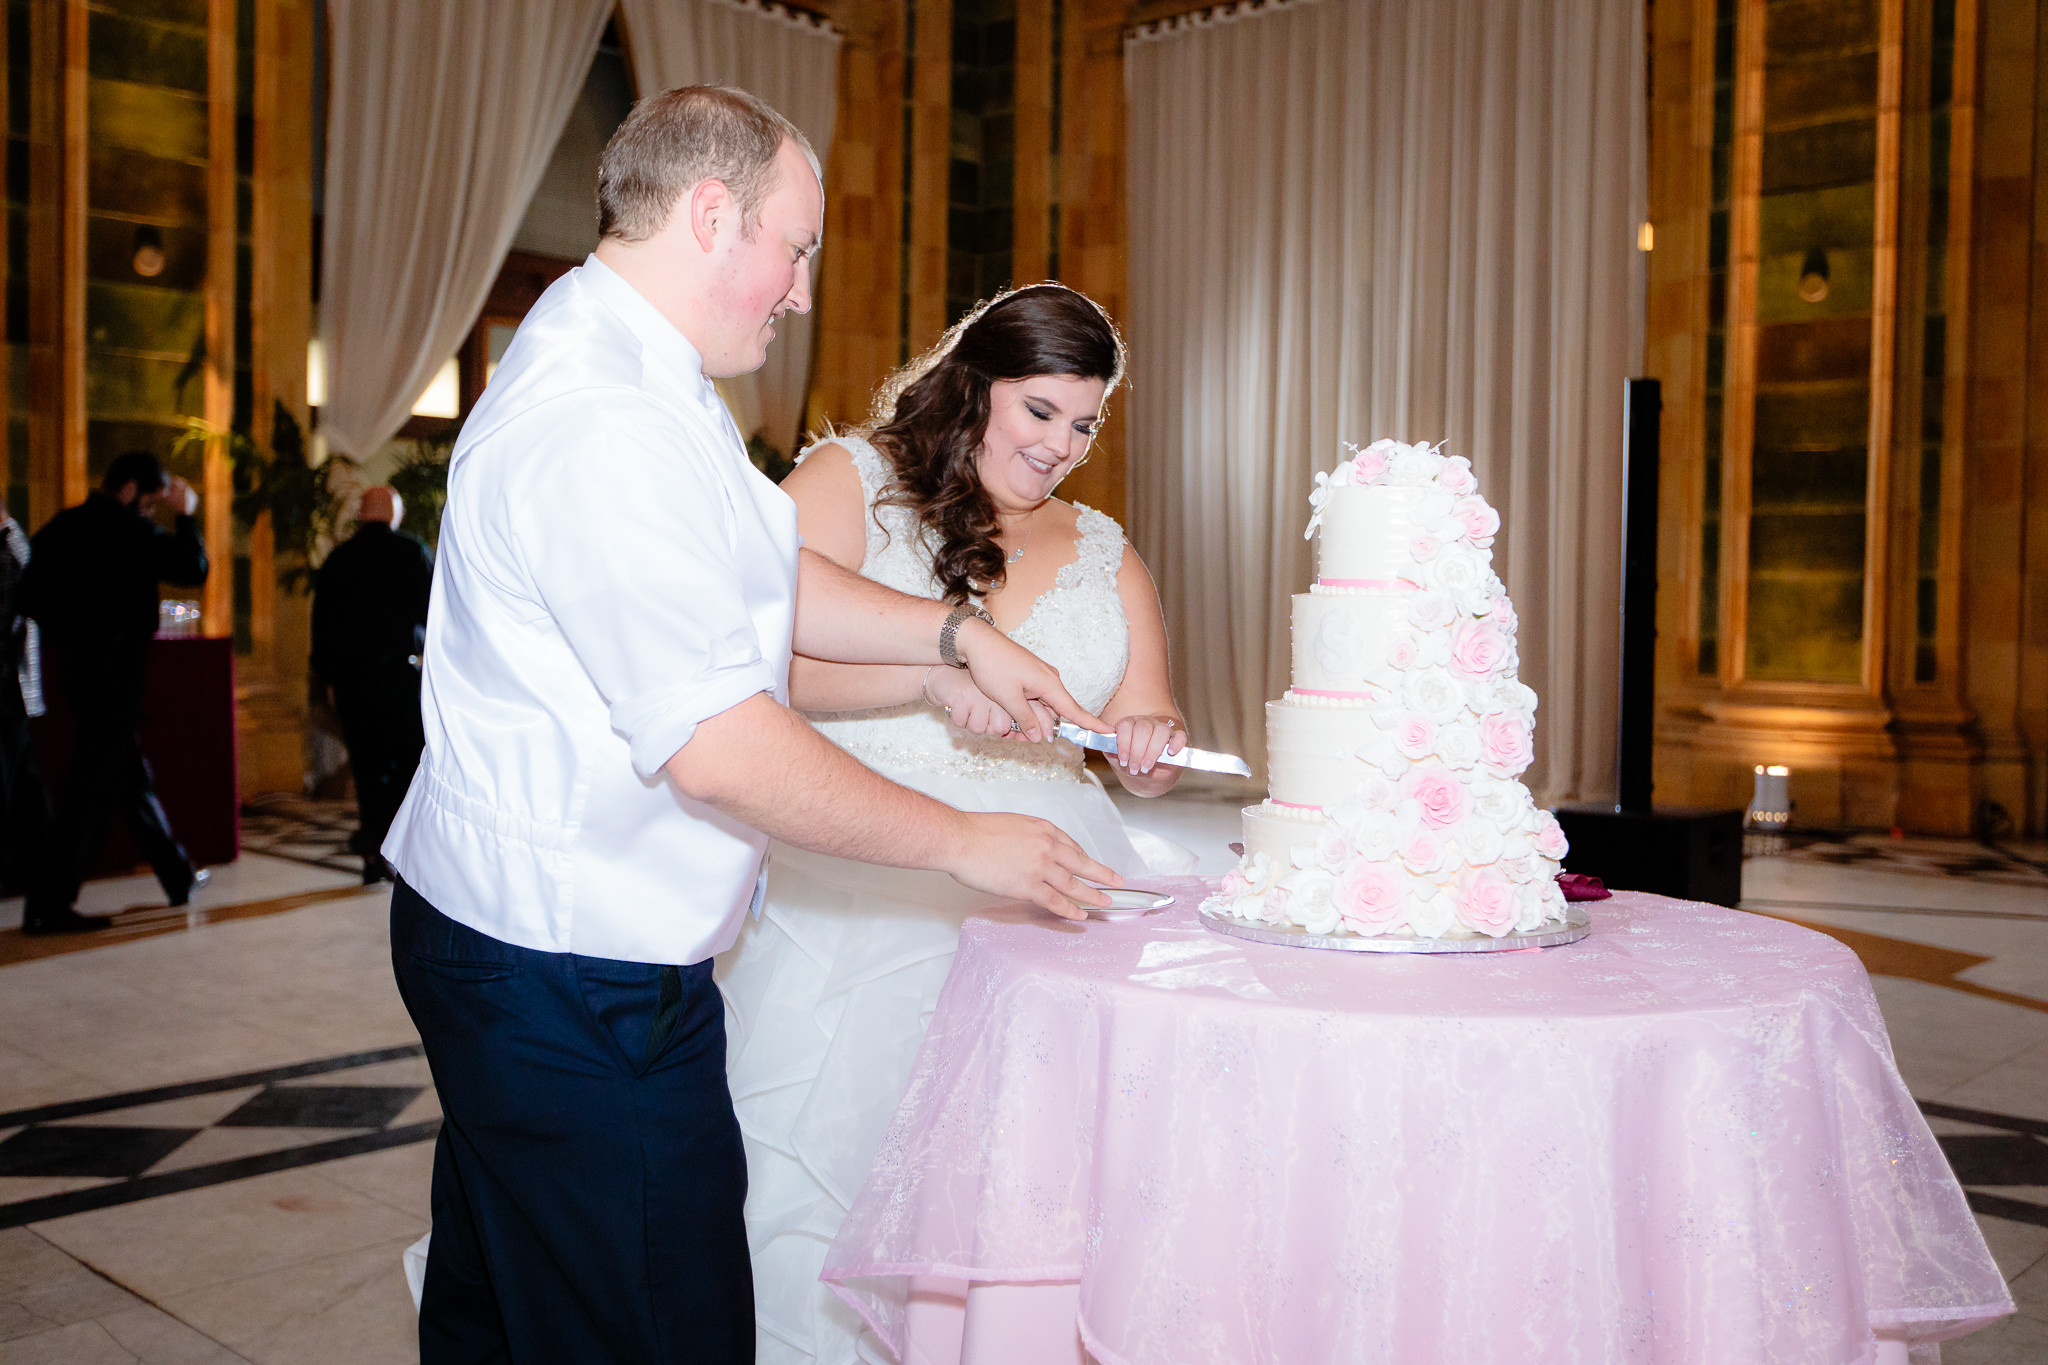 Bride and groom cut their wedding cake done by Rania's Catering at the Pennsylvanian